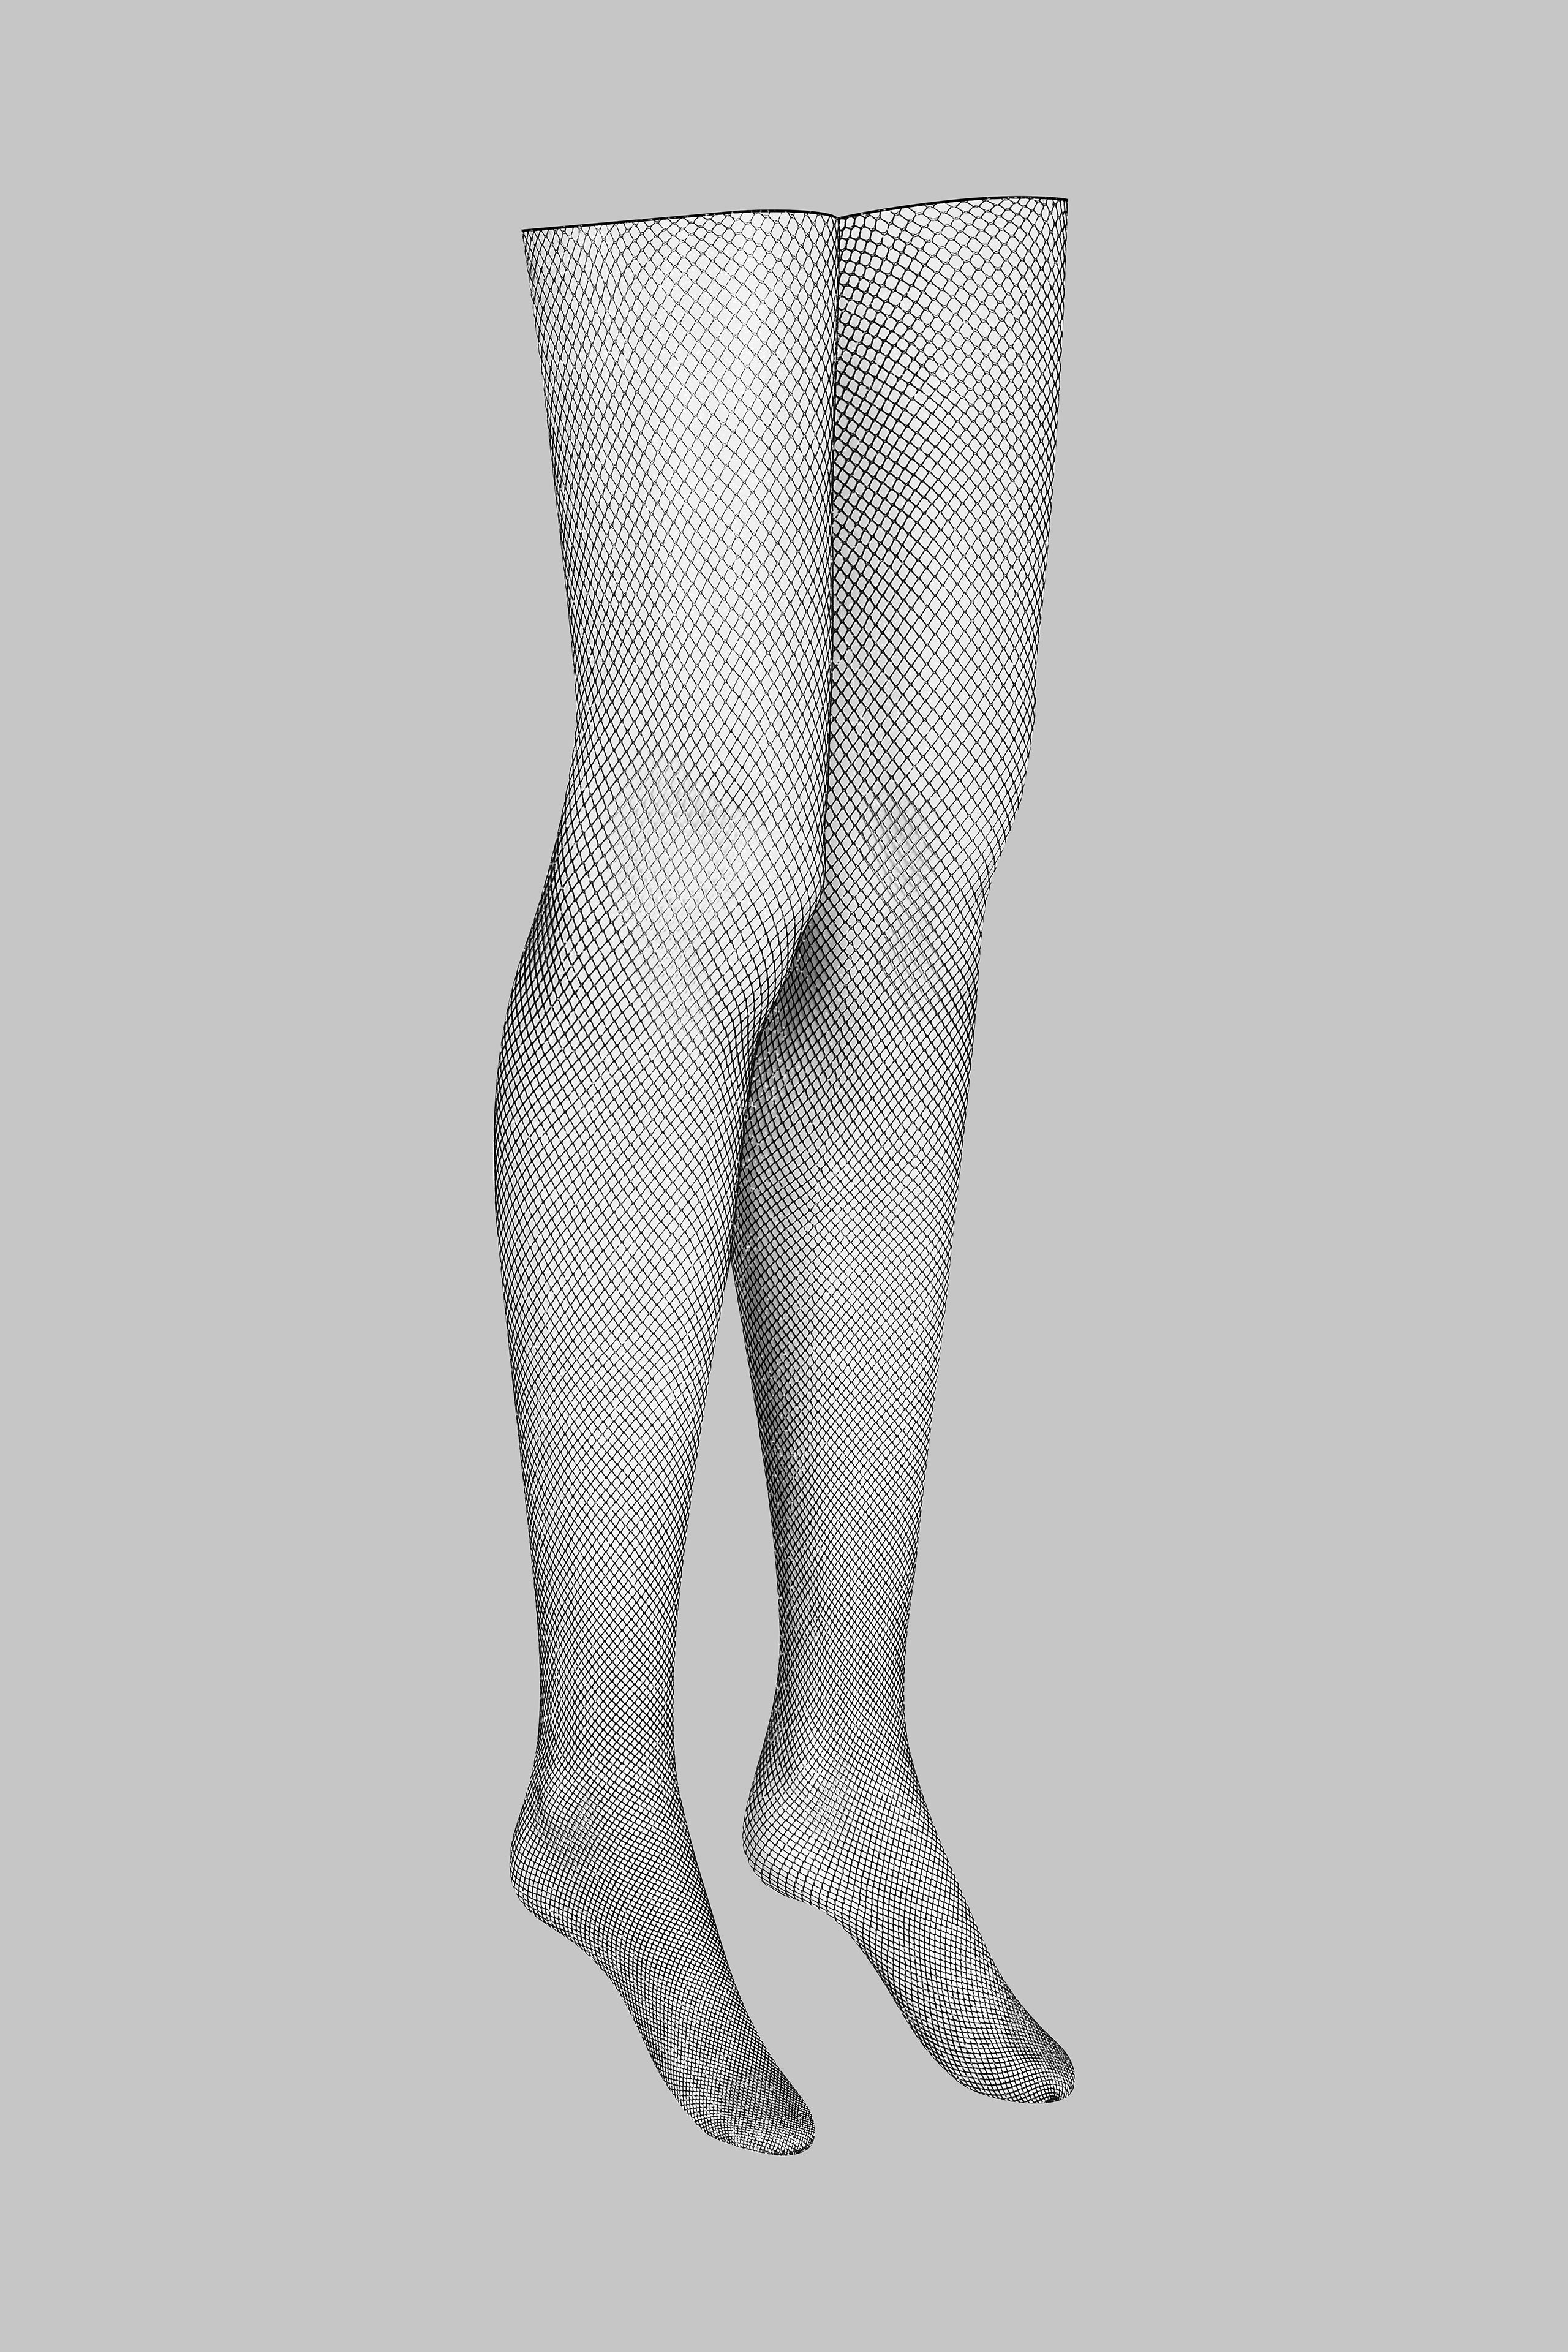 Lurex fishnet cut and curled stockings